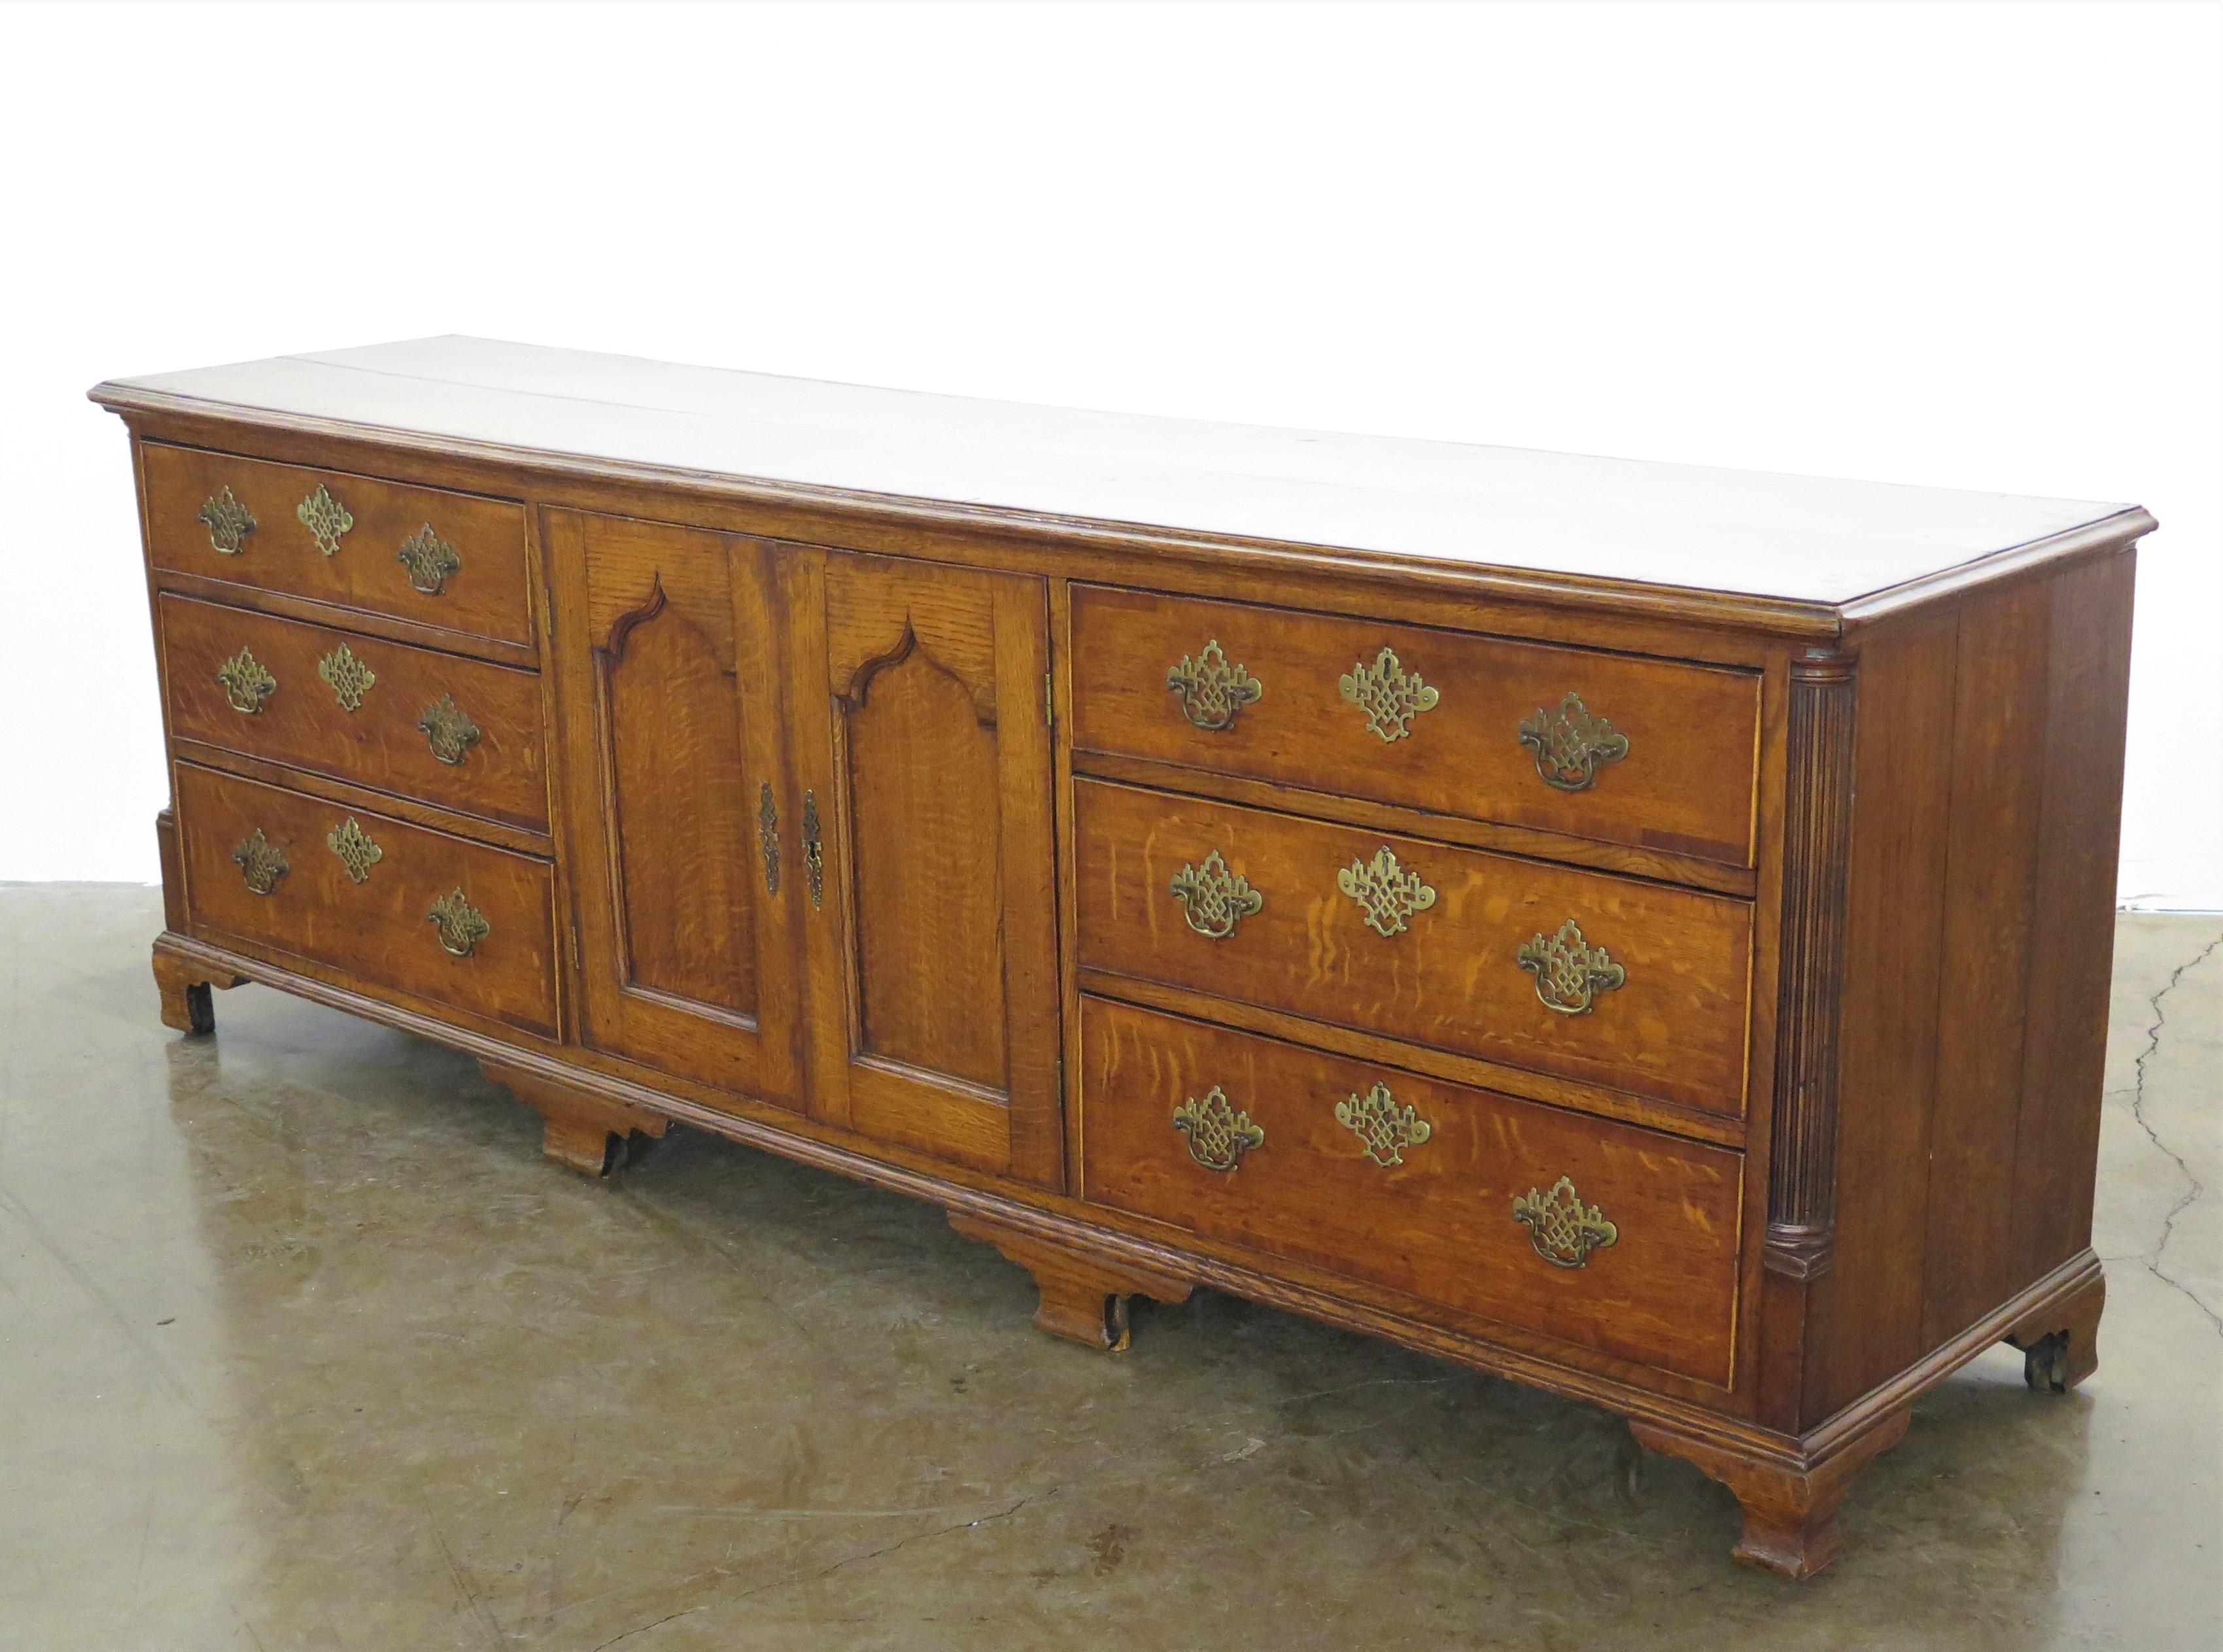 An 18th Century Georgian oak dresser base, moulded rectangular top, this dresser base has superb color and proportion, there are six drawers and a pair of panelled doors. English. 